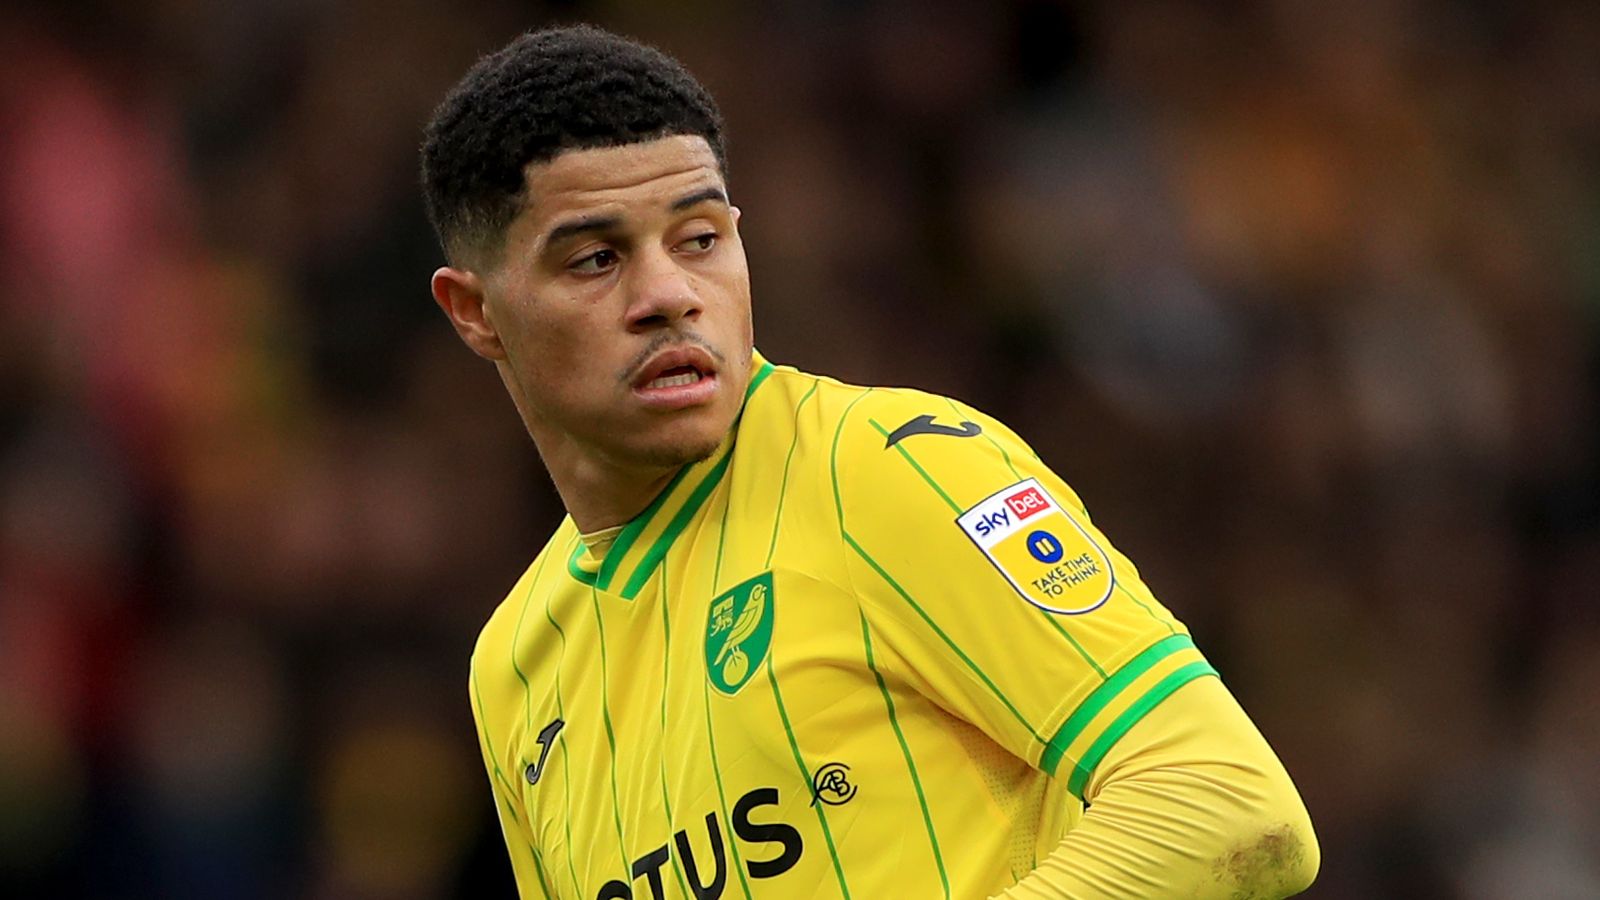 Norwich City 2-0 Cardiff City: Gabriel Sara and Marquinhos score in  Canaries win, Football News